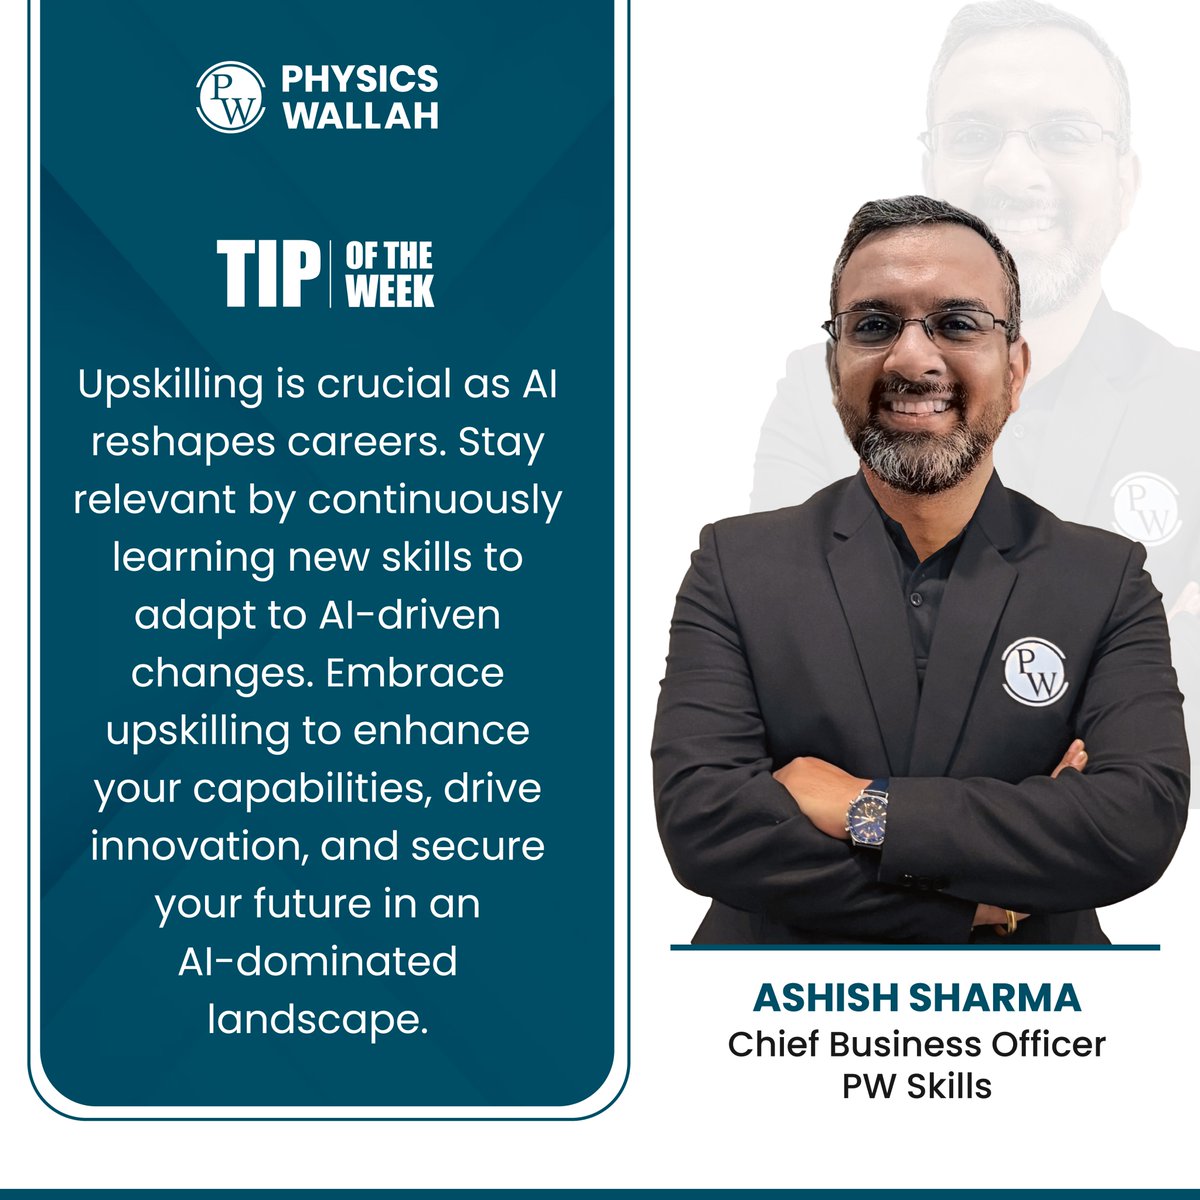 Welcome to this week’s edition of #TipOfTheWeek with Ashish Sharma, our CBO at PW Skills!

Discover his insights on how upskilling is crucial as AI is reshaping careers.

#AI #upskilling #innovation #physicswallah